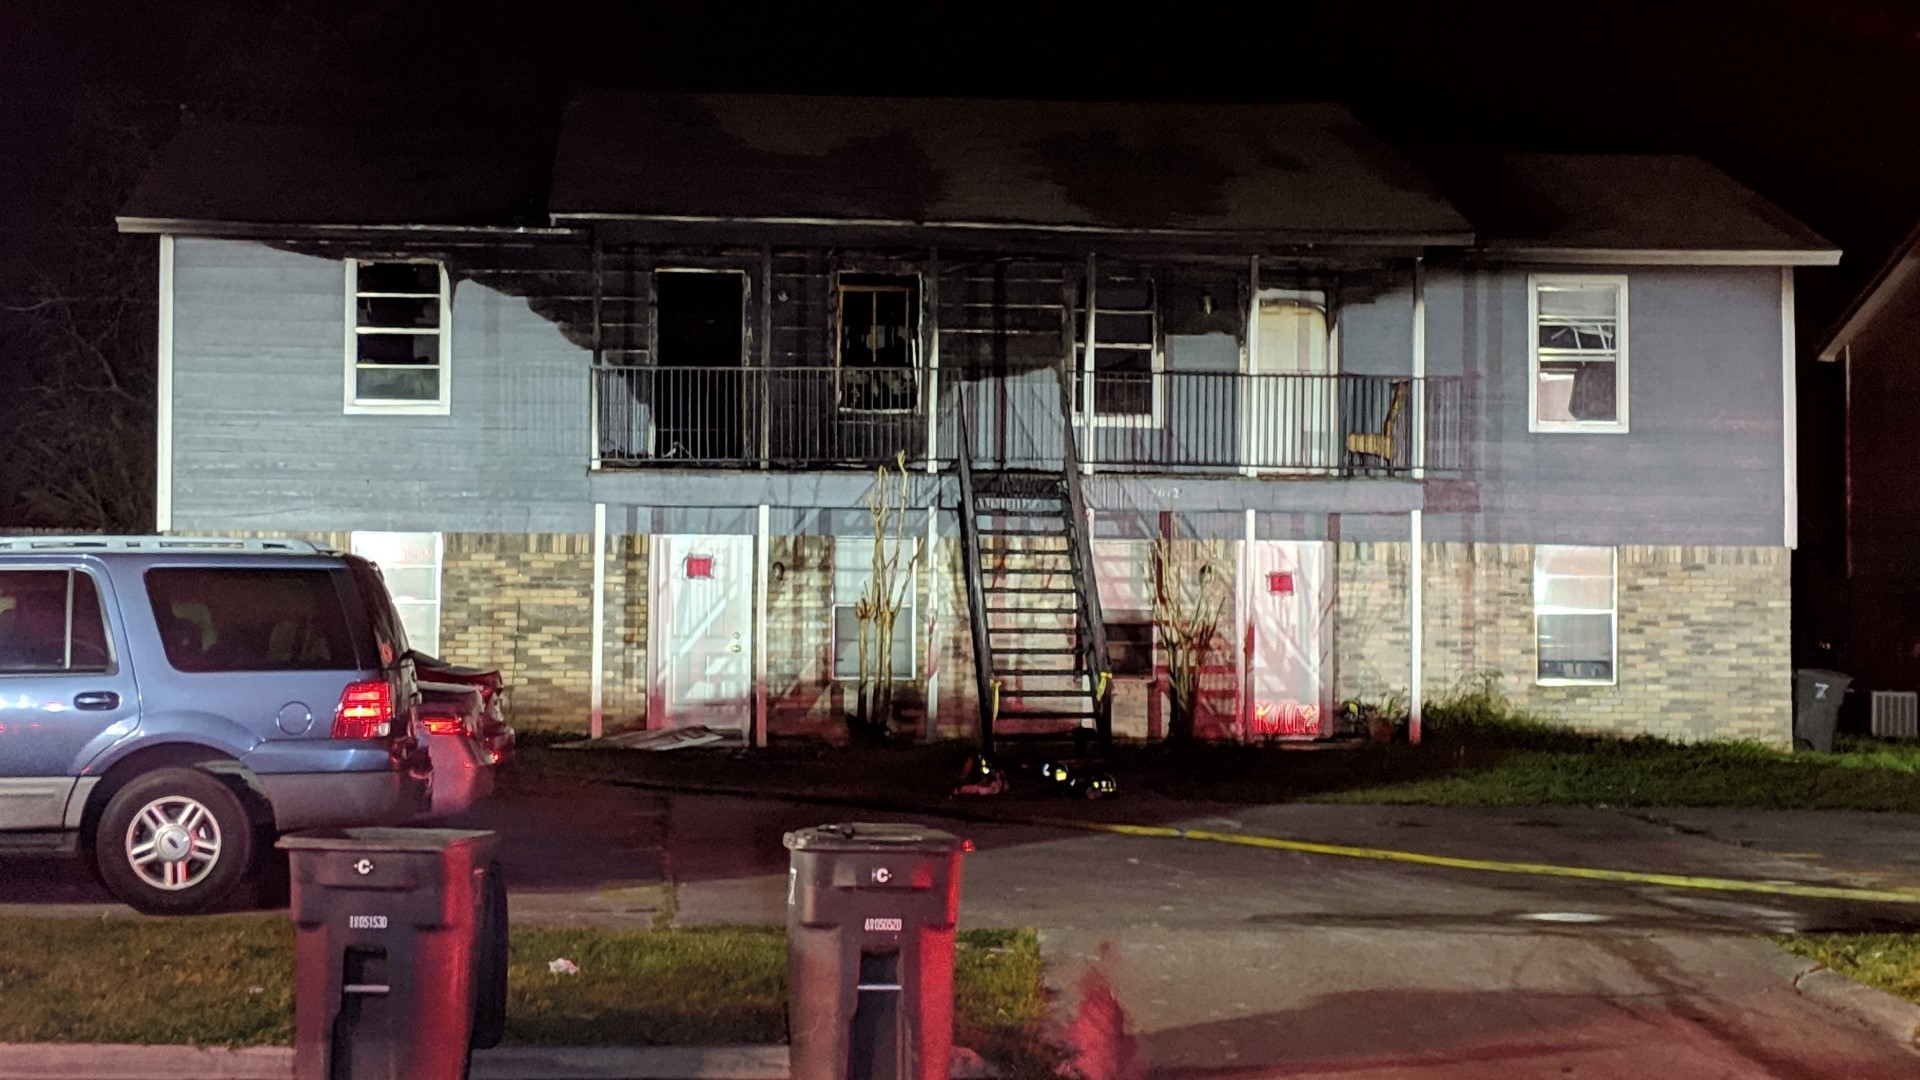 Fire crews and the Red Cross are cleaning up the aftermath of an early morning fire at a fourplex on Cedar Hill Drive in Killeen. Officials say 14 residents were able to escape safely with no injuries.